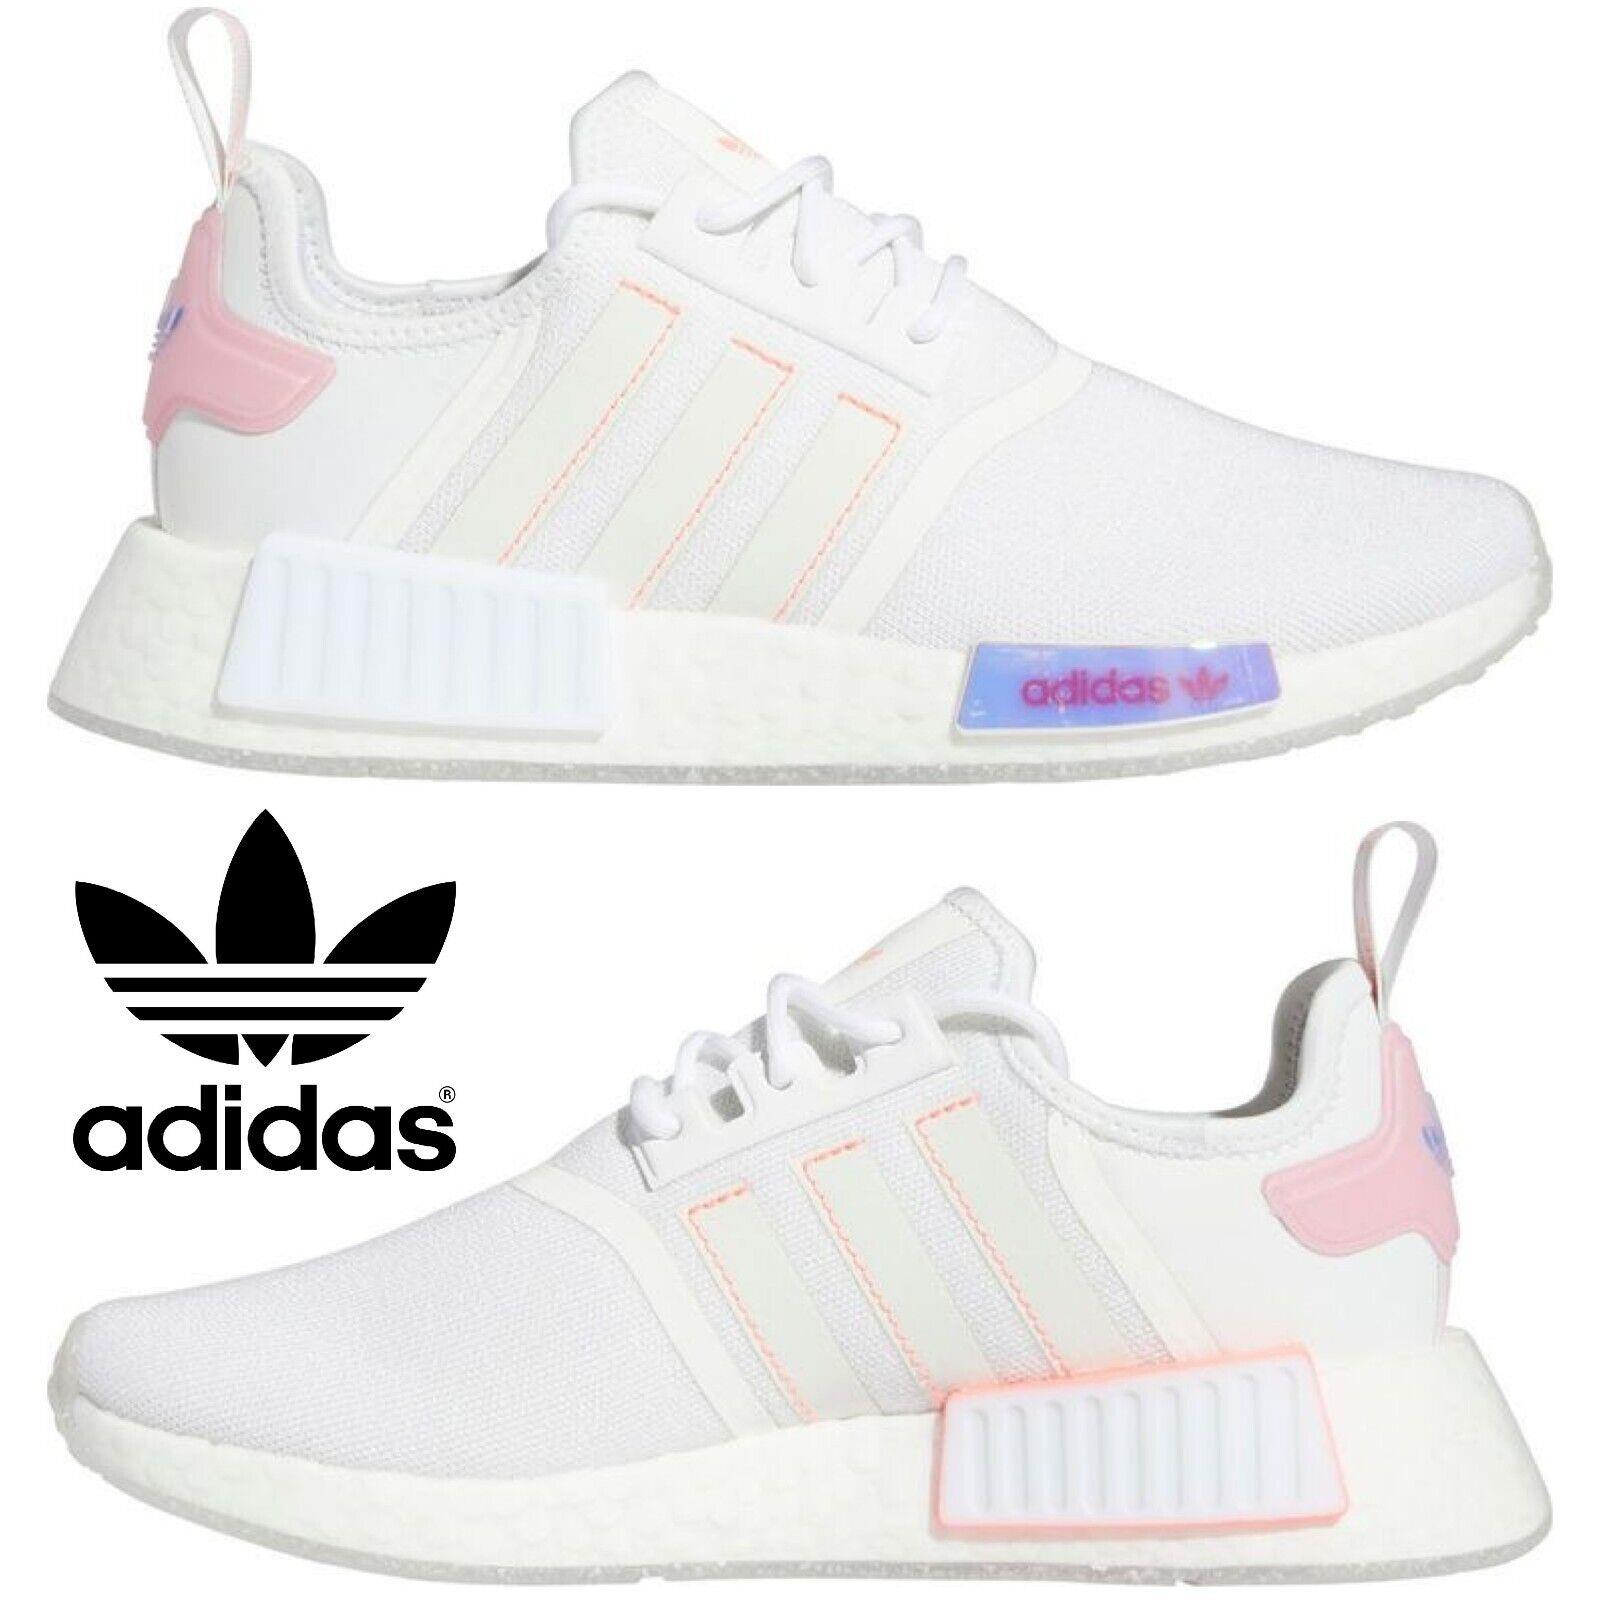 Adidas Originals Nmd R1 Women s Sneakers Casual Shoes Sport Running White